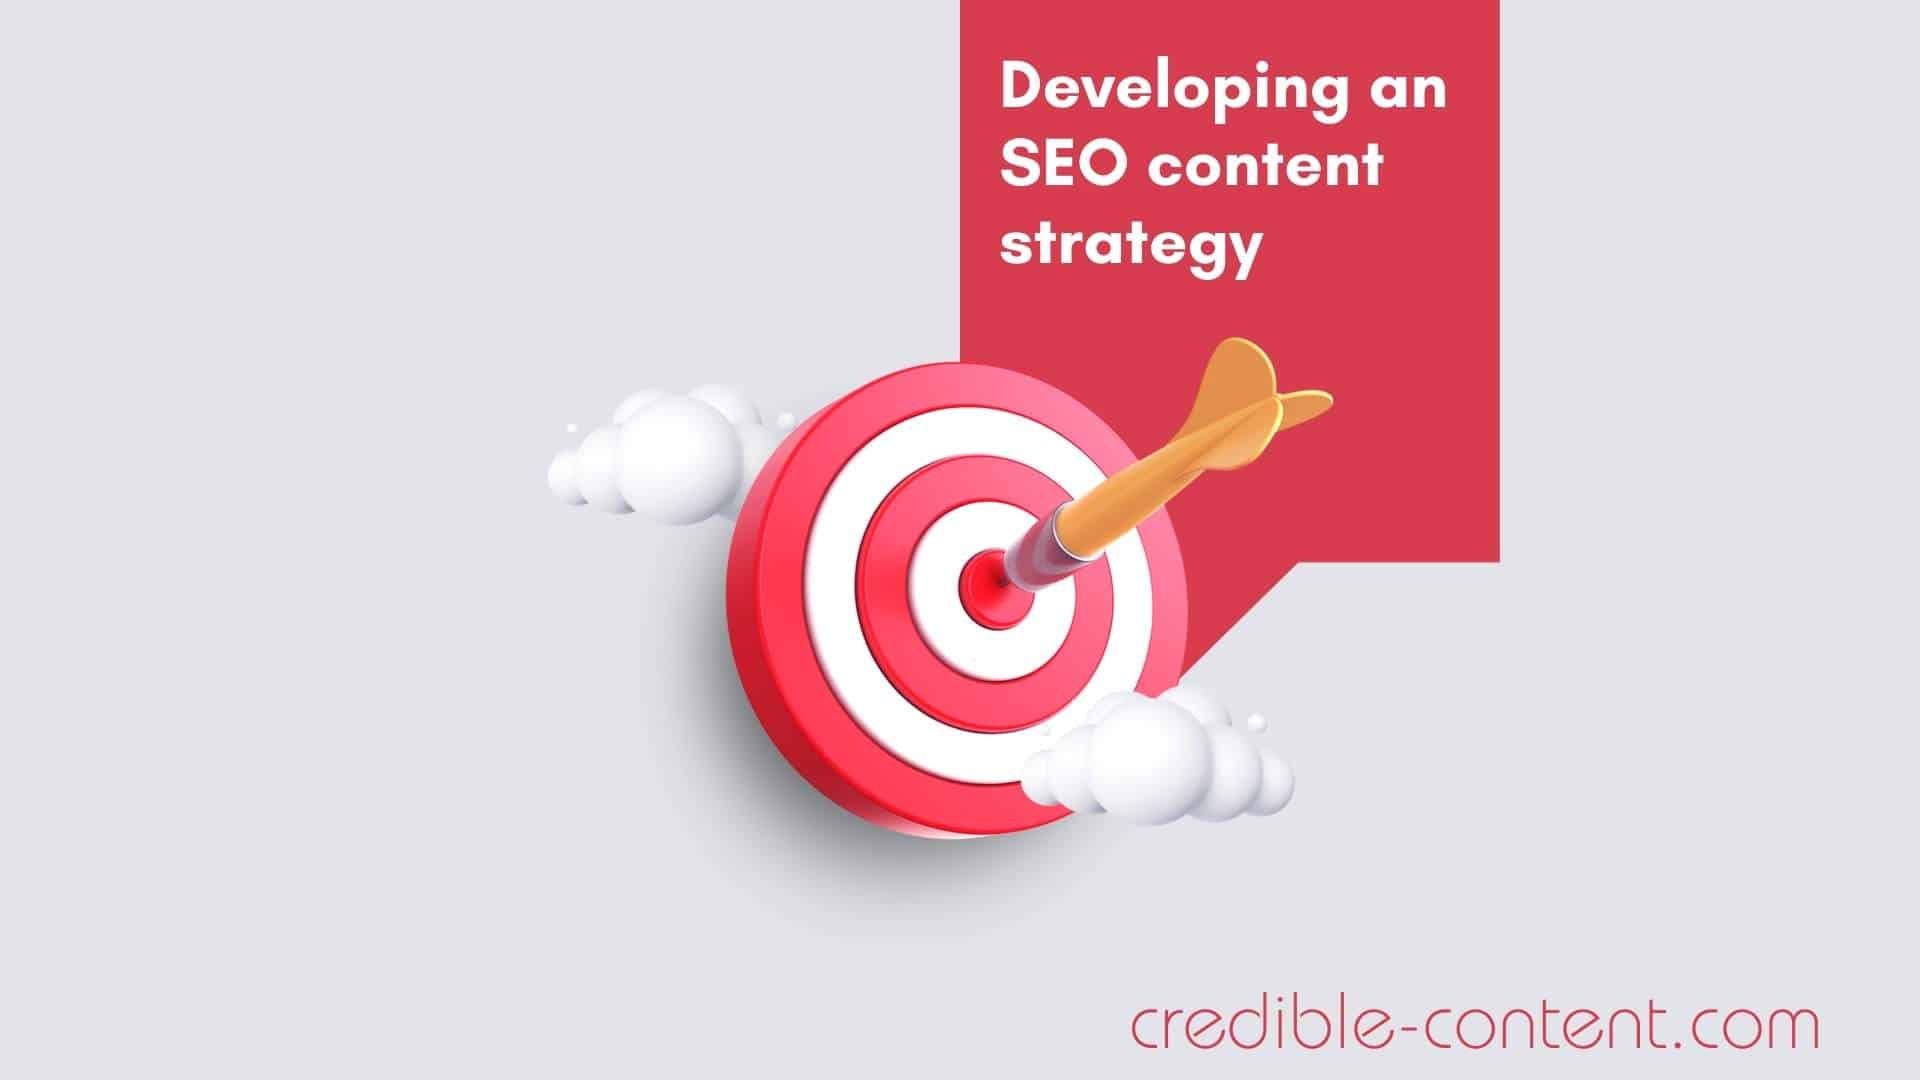 Developing an SEO content strategy